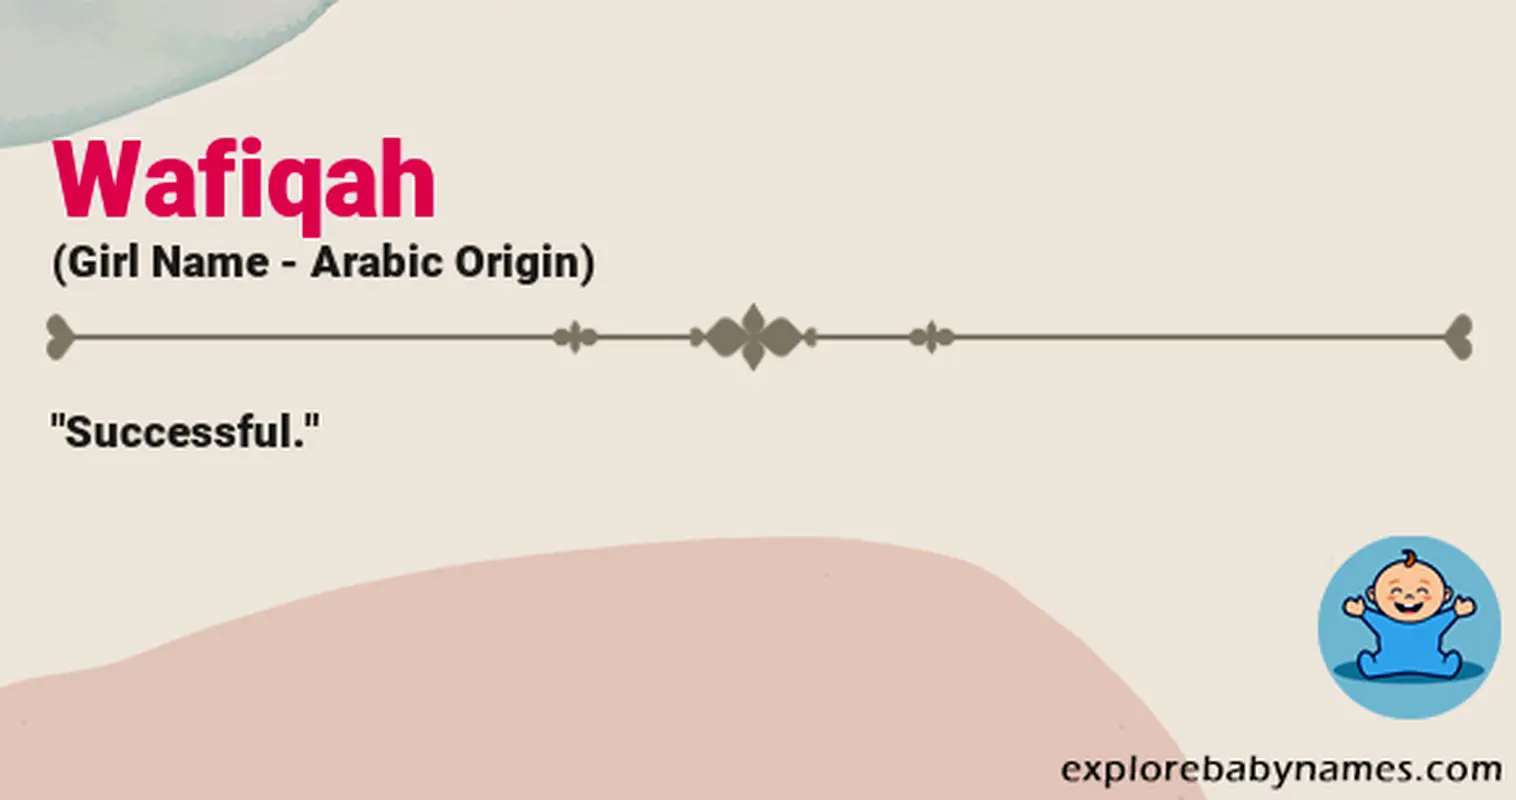 Meaning of Wafiqah